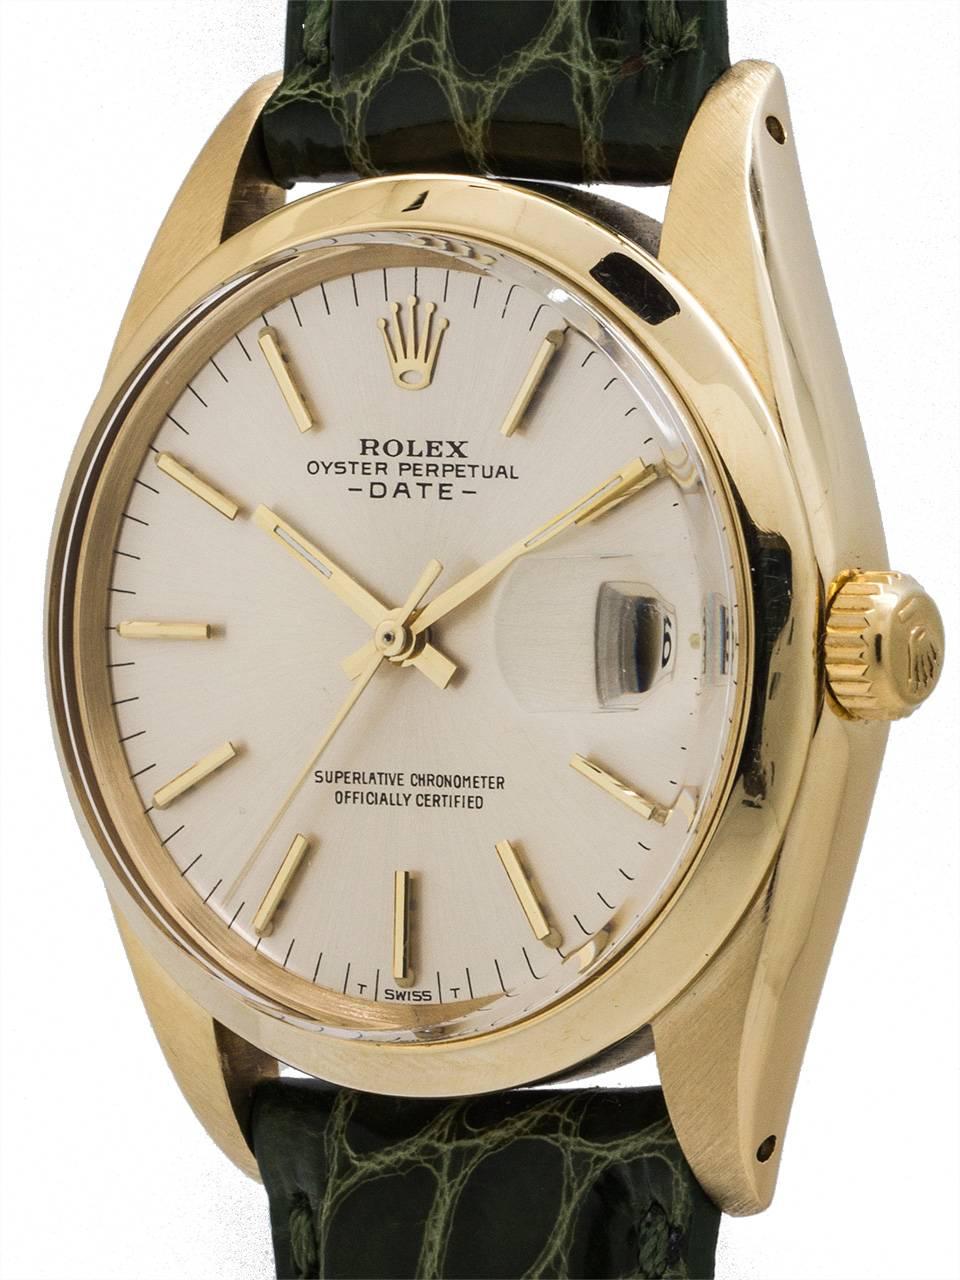 
Vintage Rolex 14K YG ref 1500 serial # 1.8 million circa 19. Featuring 34mm diameter man’s size case with smooth bezel and acrylic crystal and beautiful original silvered satin dial with applied gold indexes and gilt baton hands. Powered by